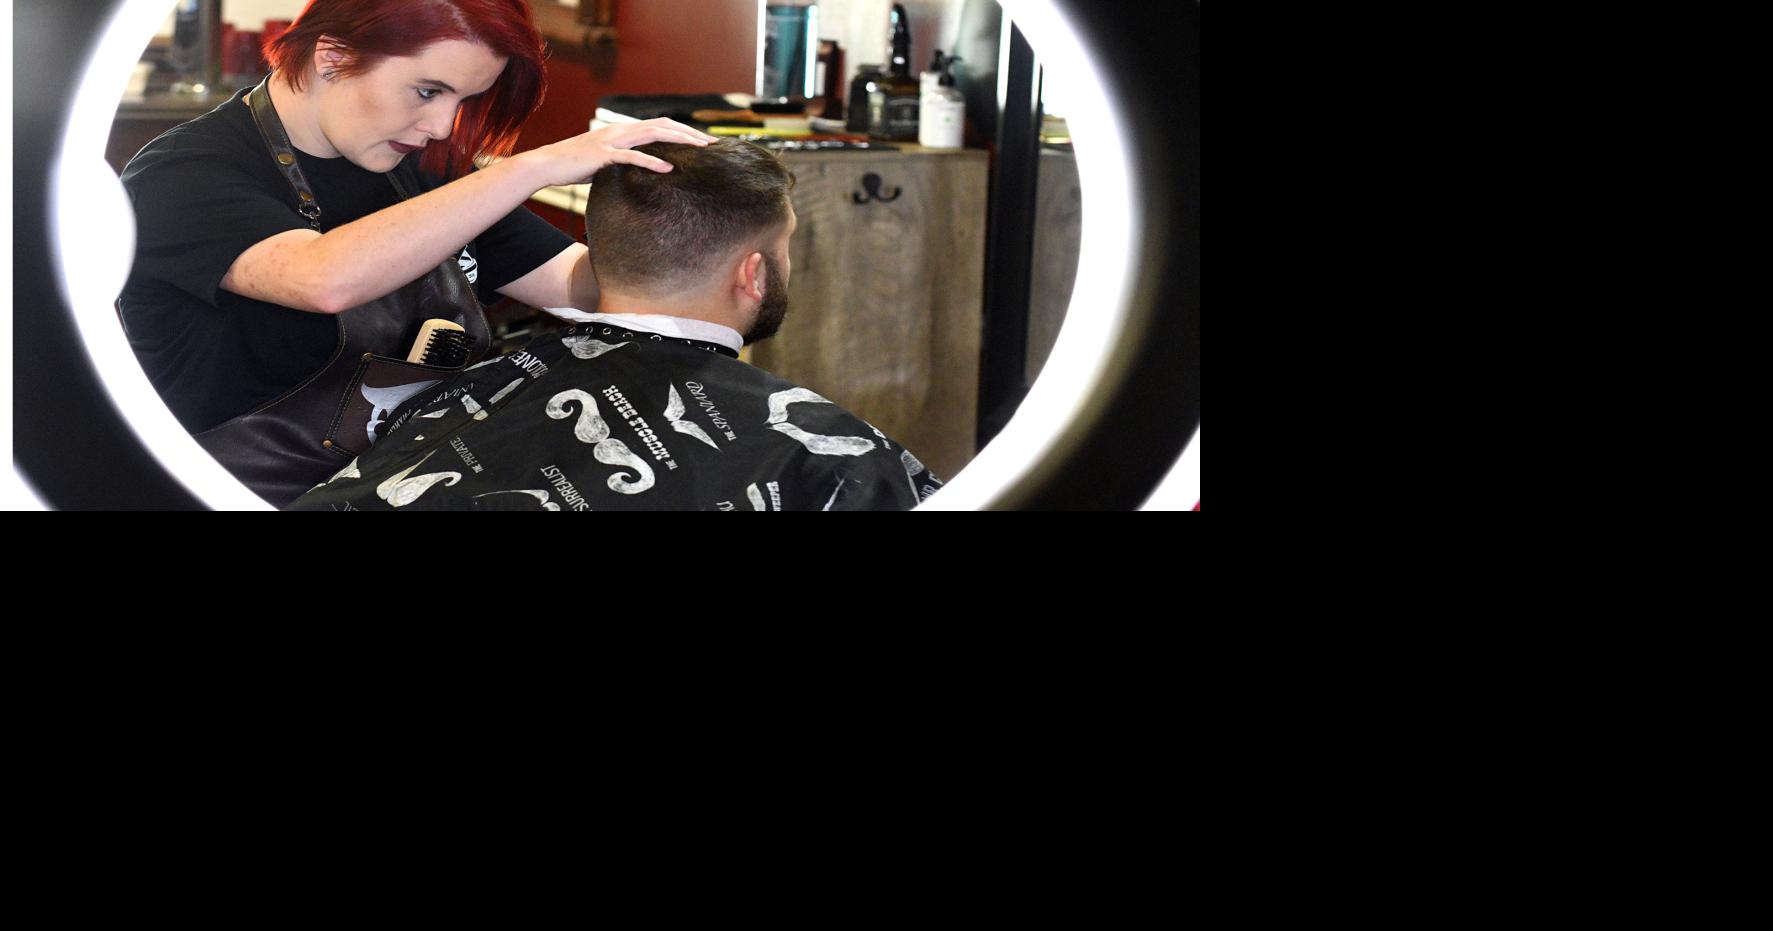 Barbershop with craft beer, vintage video games is ready to give you a hot  towel shave